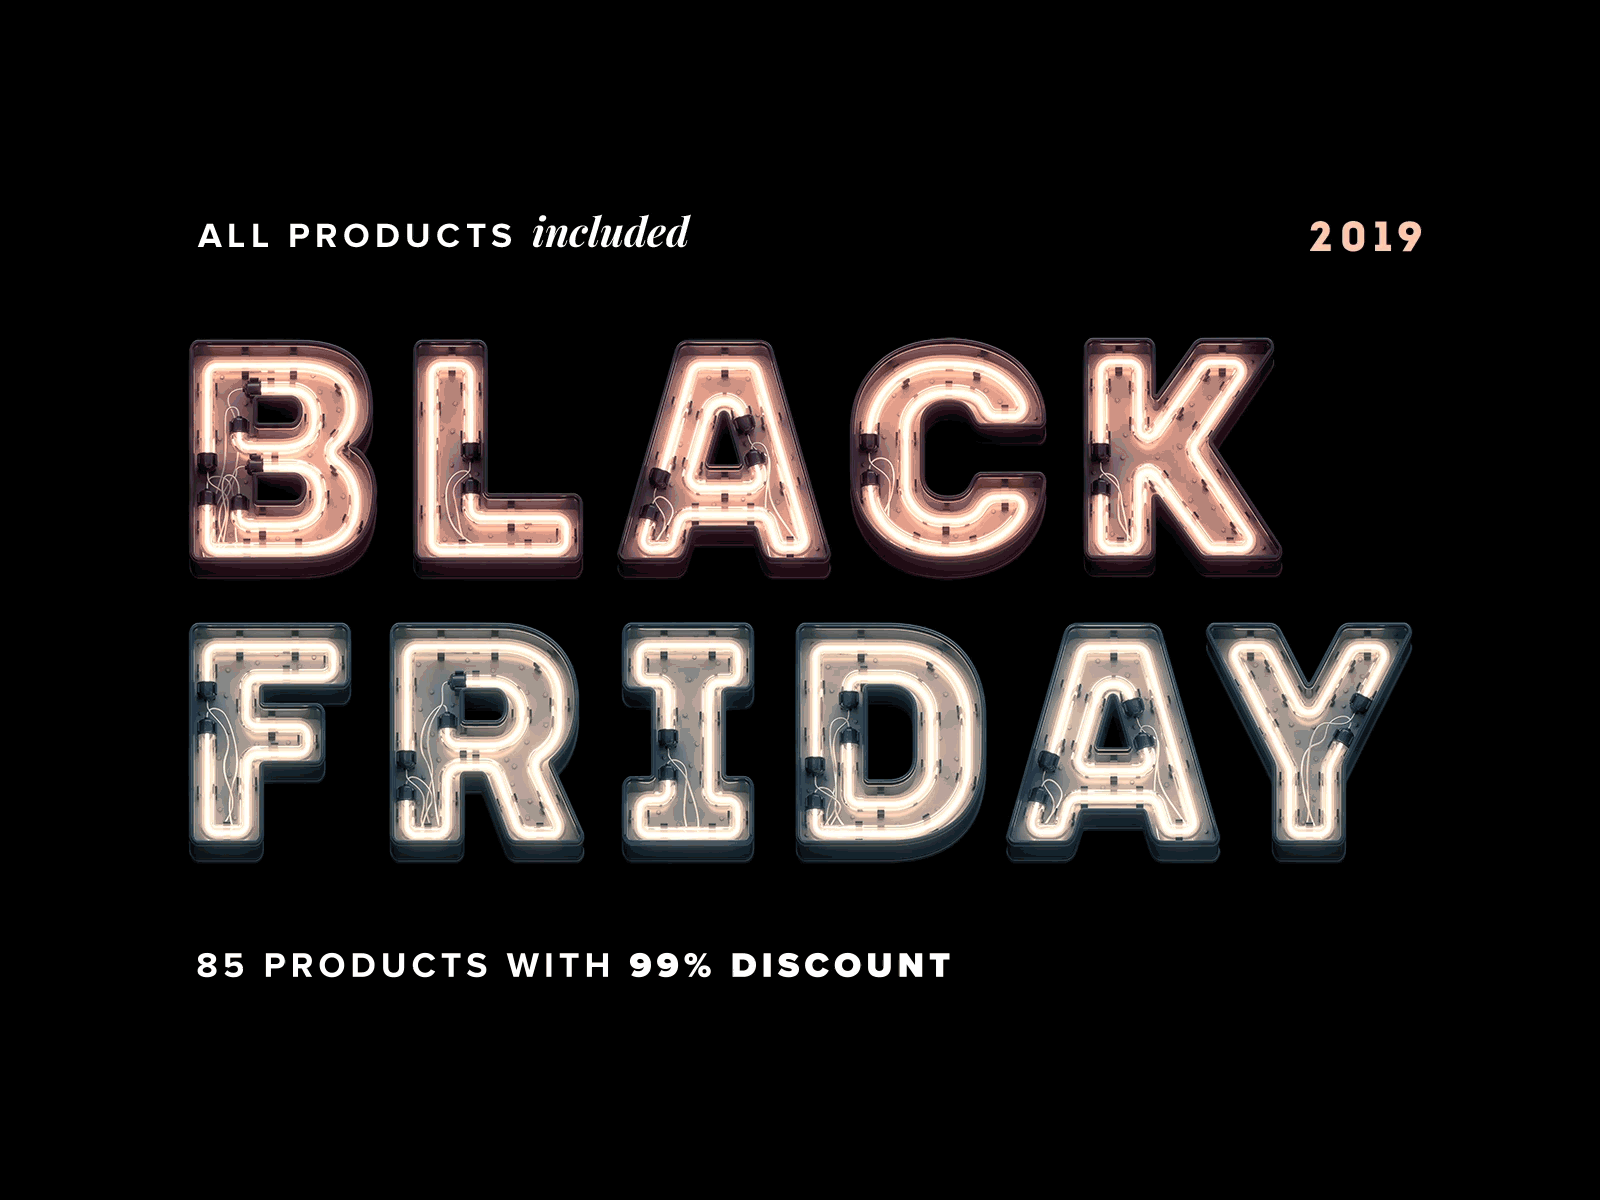 black-friday-the-entire-shop-bundle-by-pixelbuddha-on-dribbble